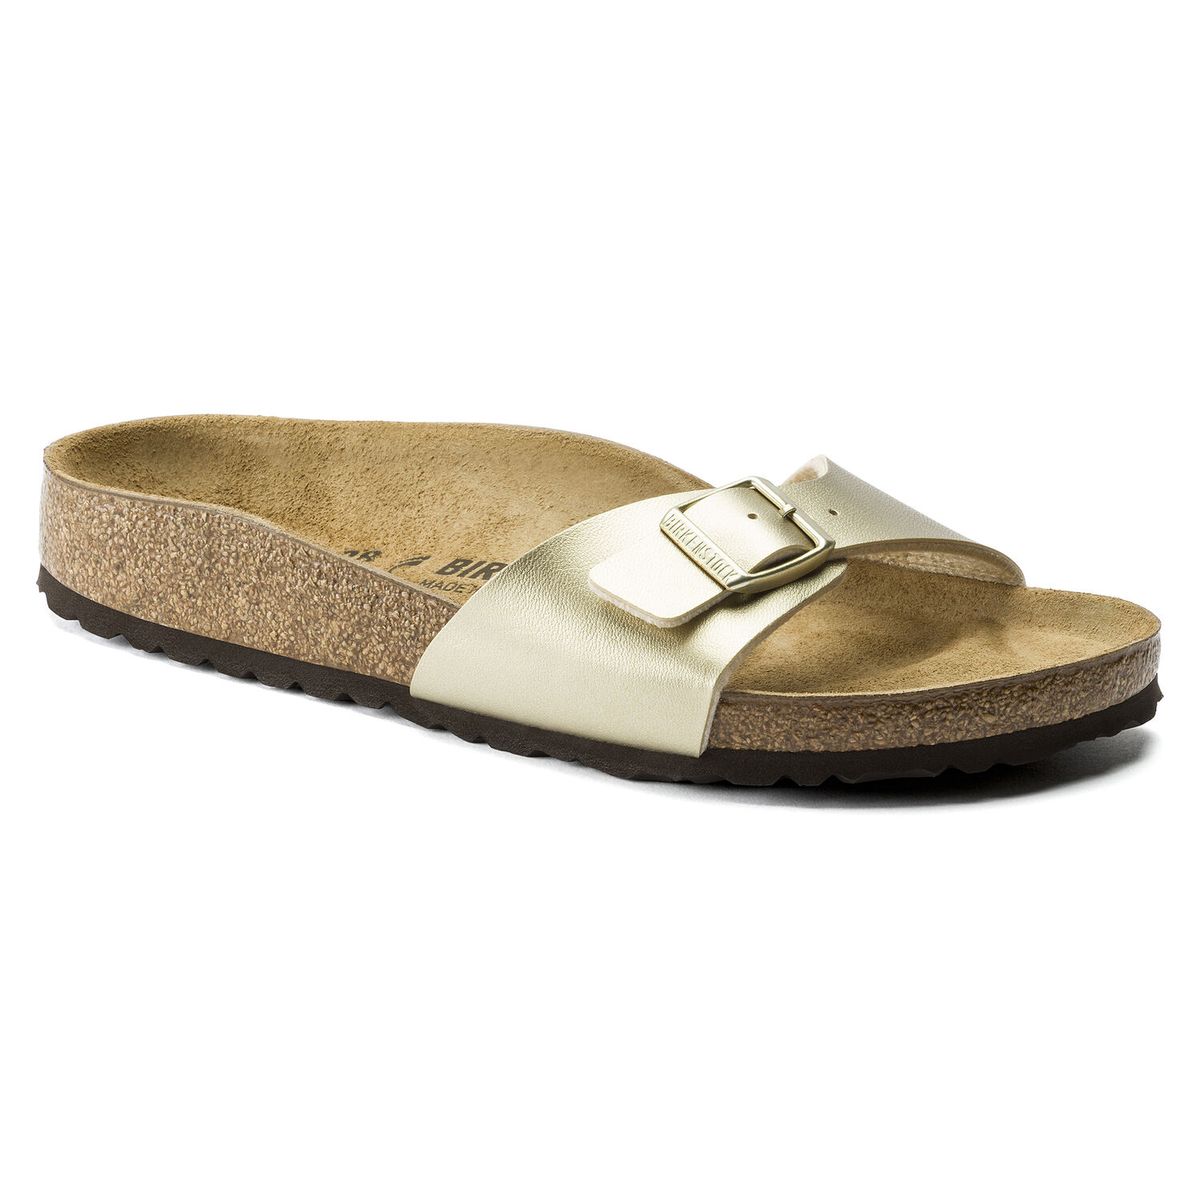 ugly' sandals have more than doubled 